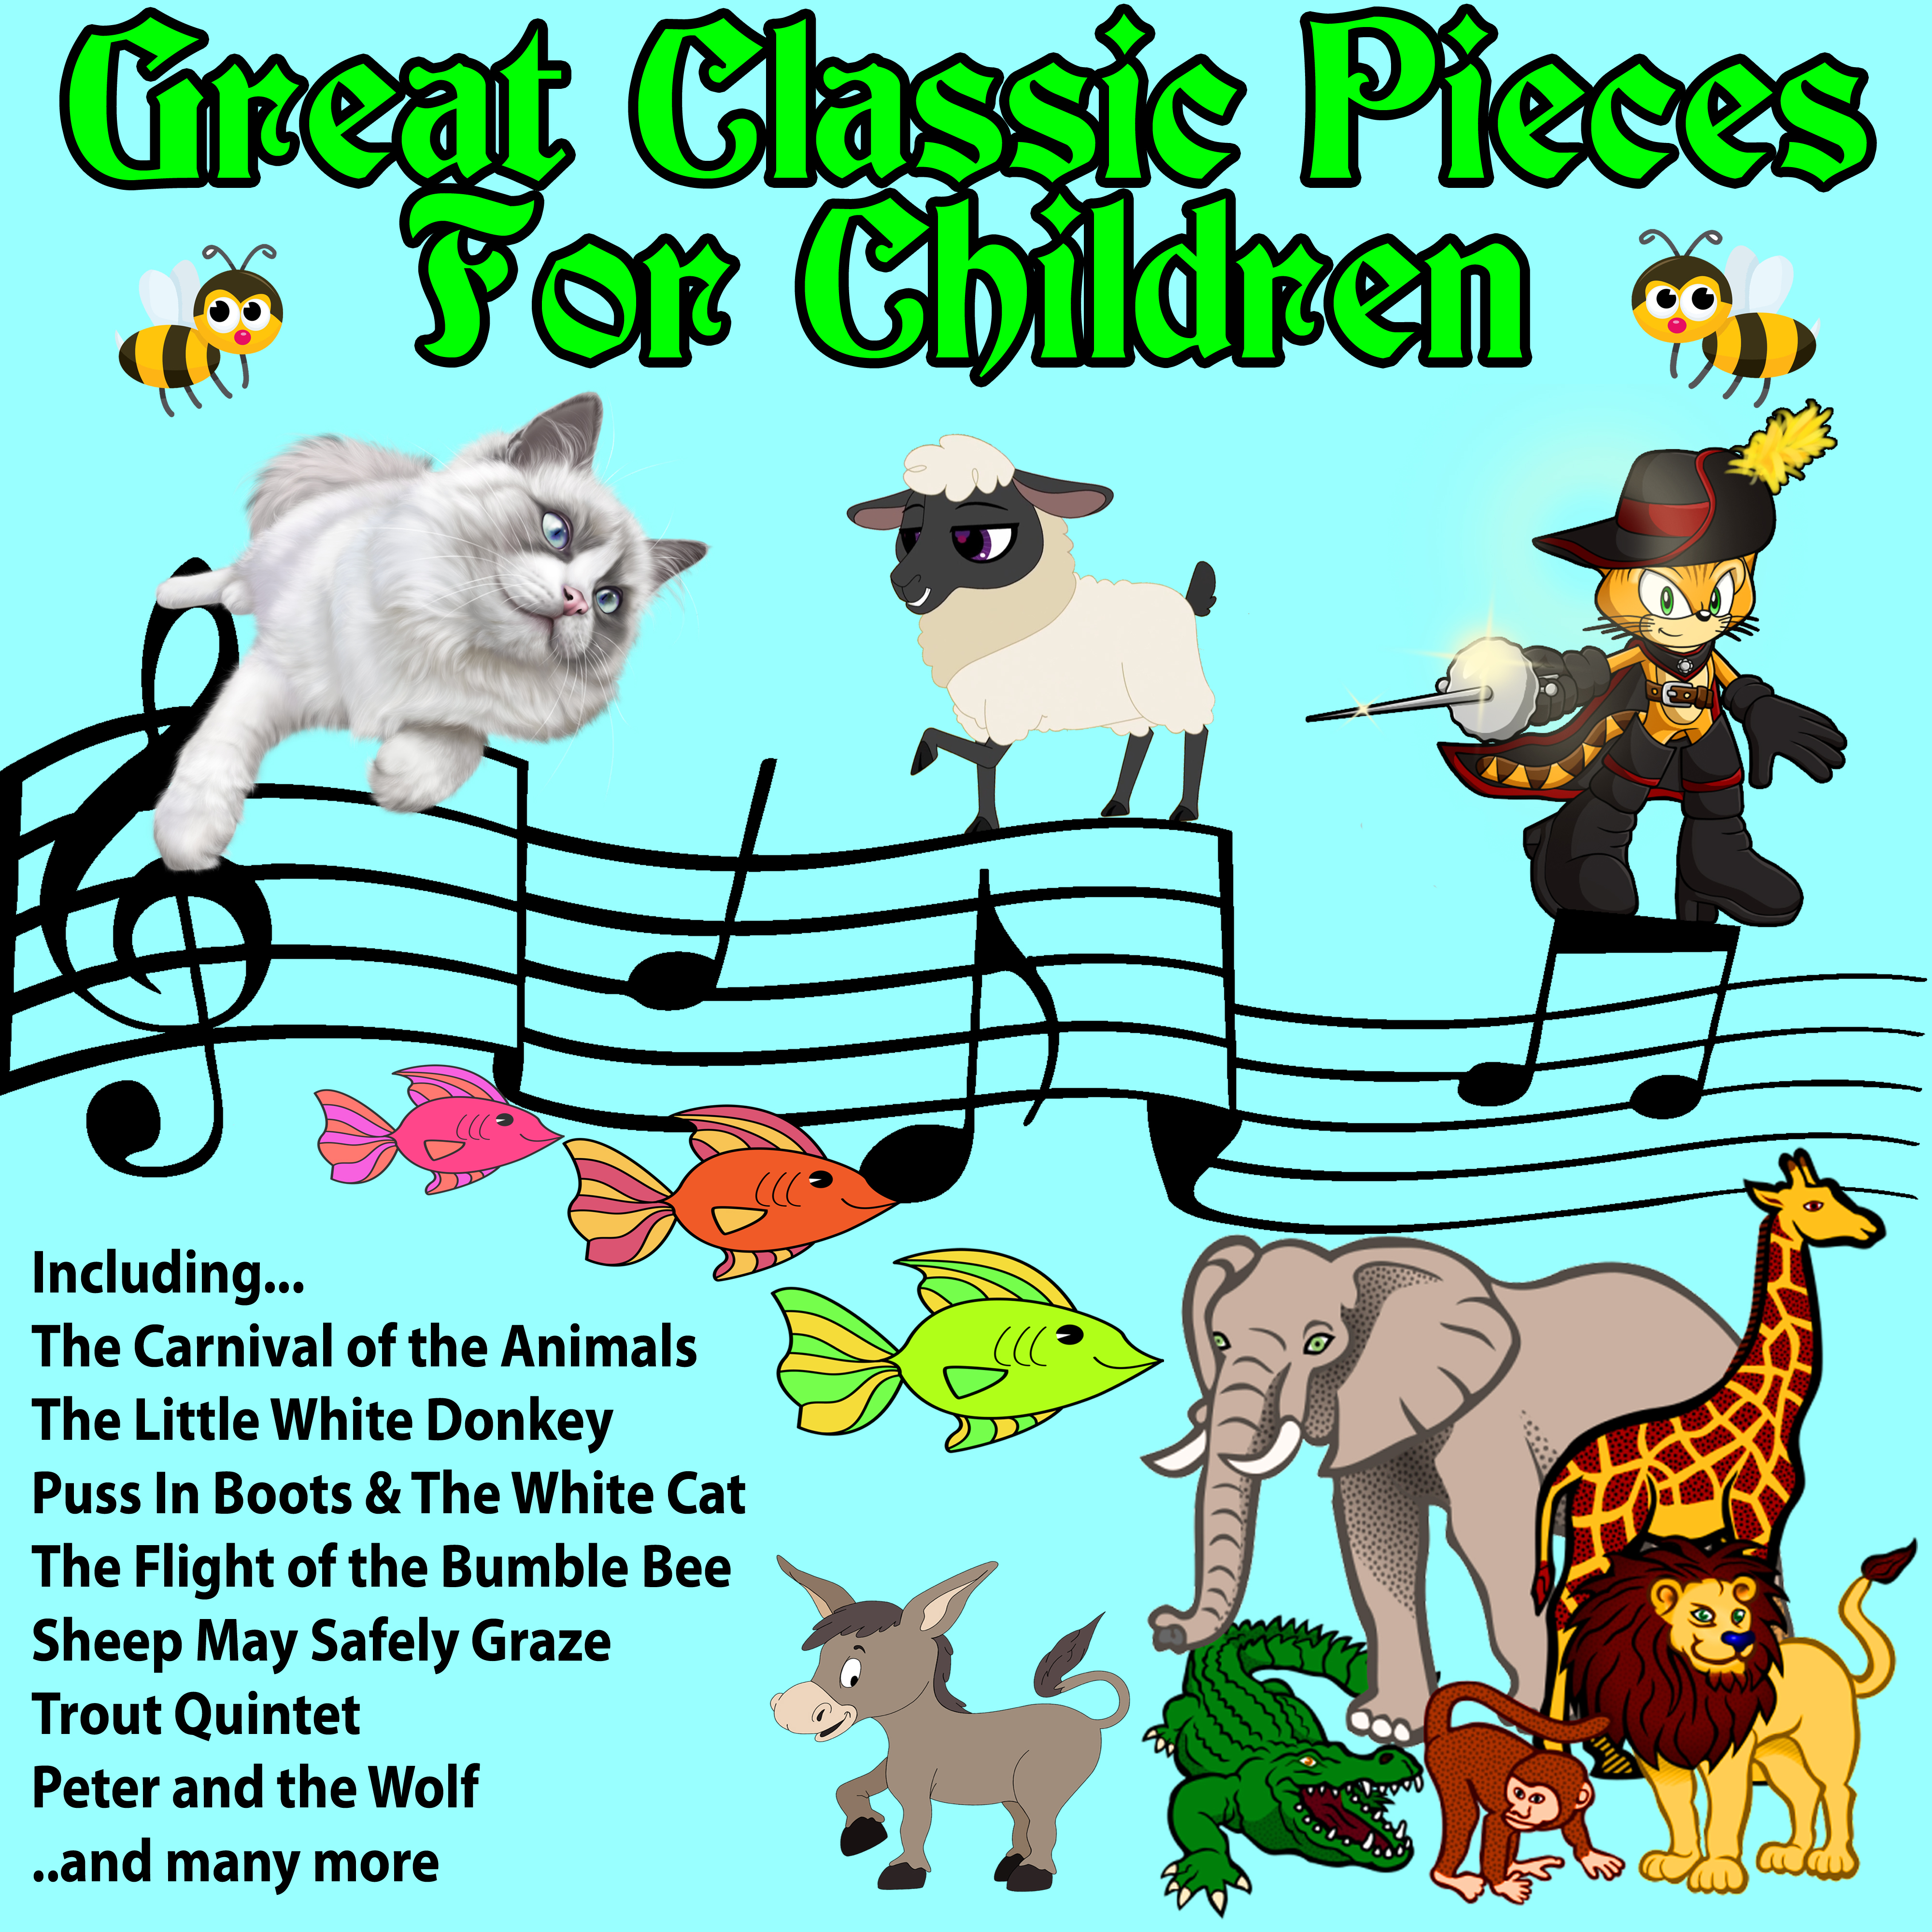 Great Classic Pieces for Children